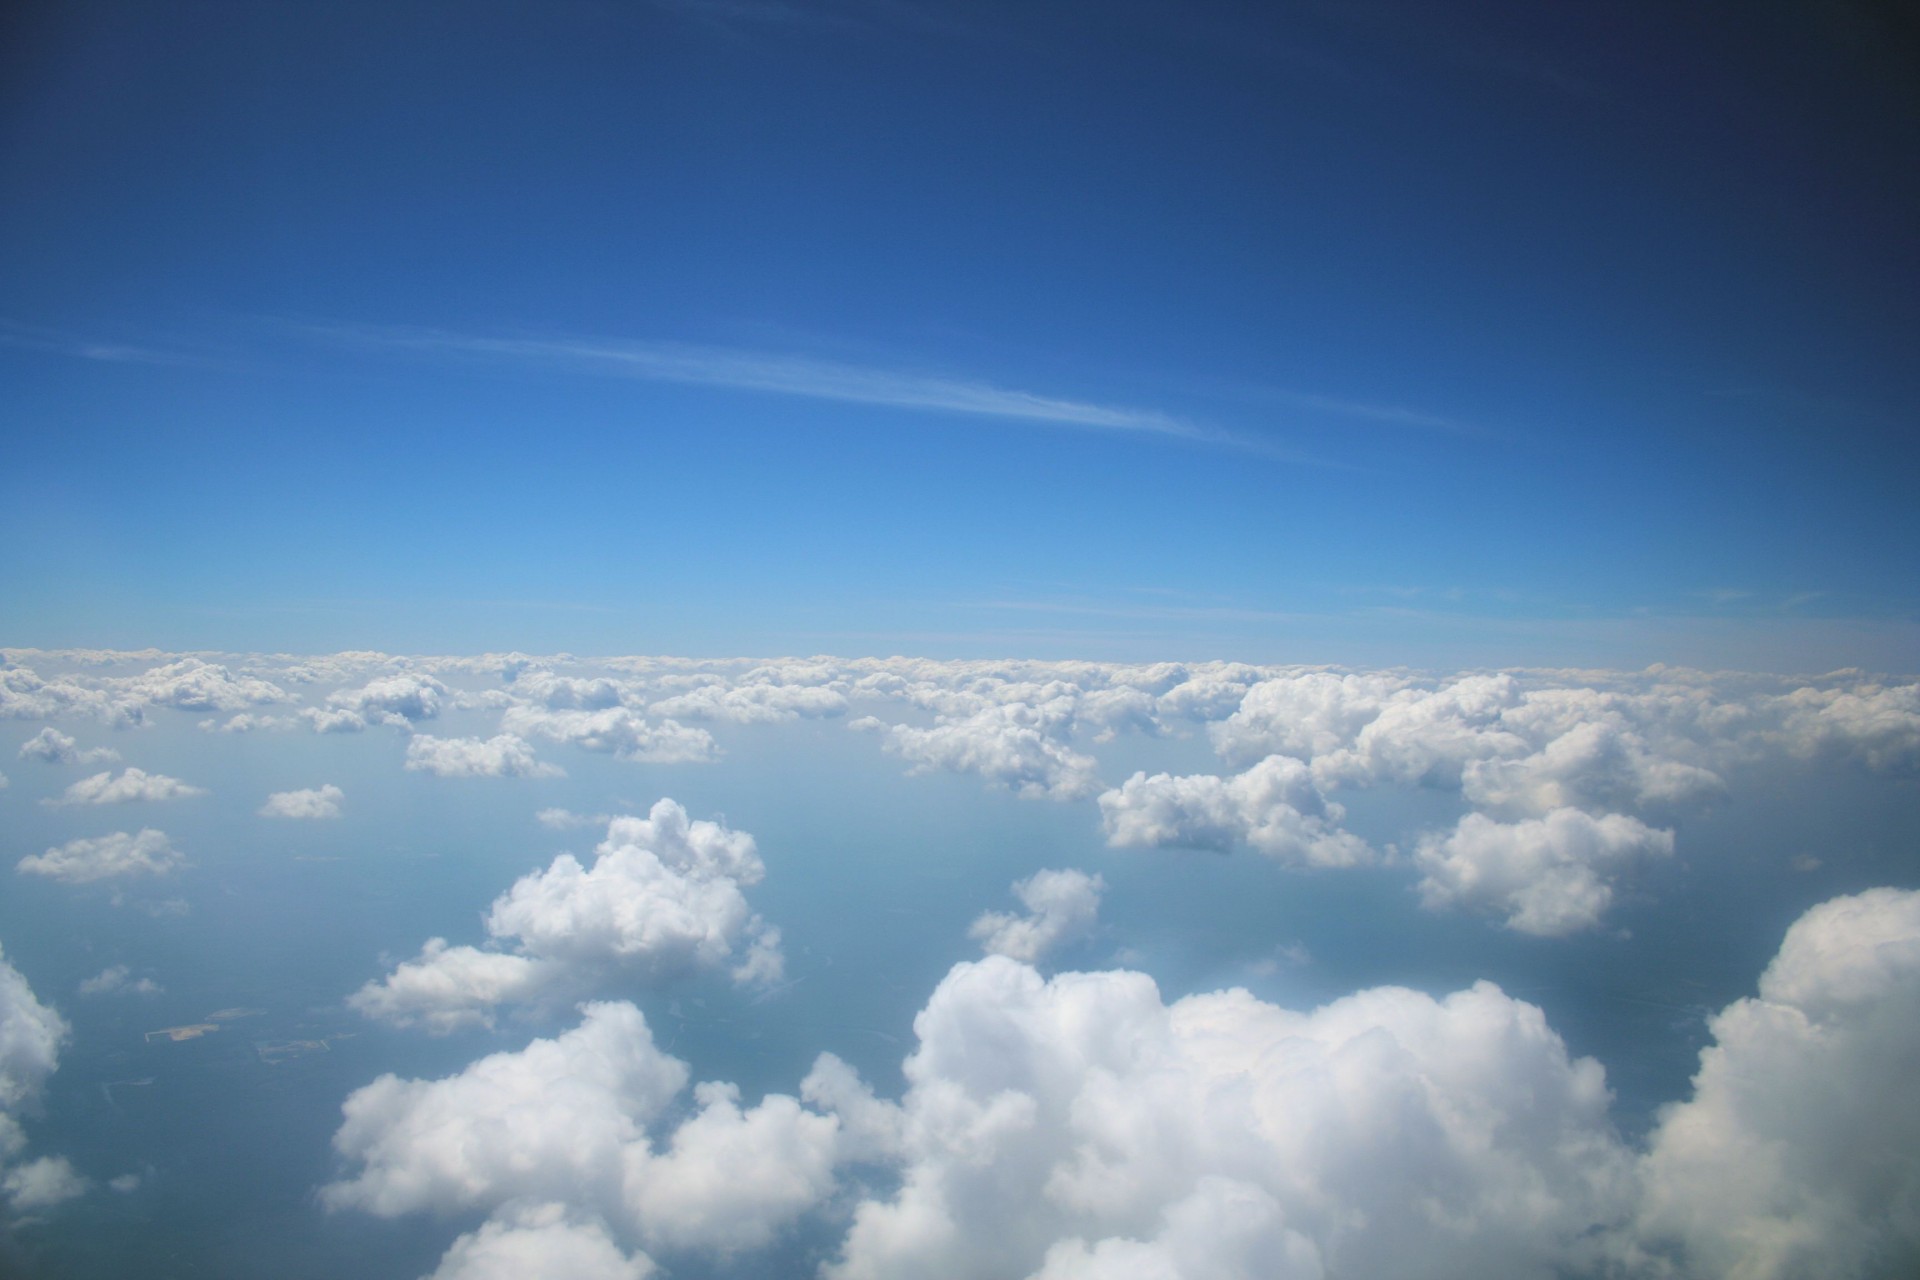 I love how the clouds look way up in a airplane looking out, and they are below you.